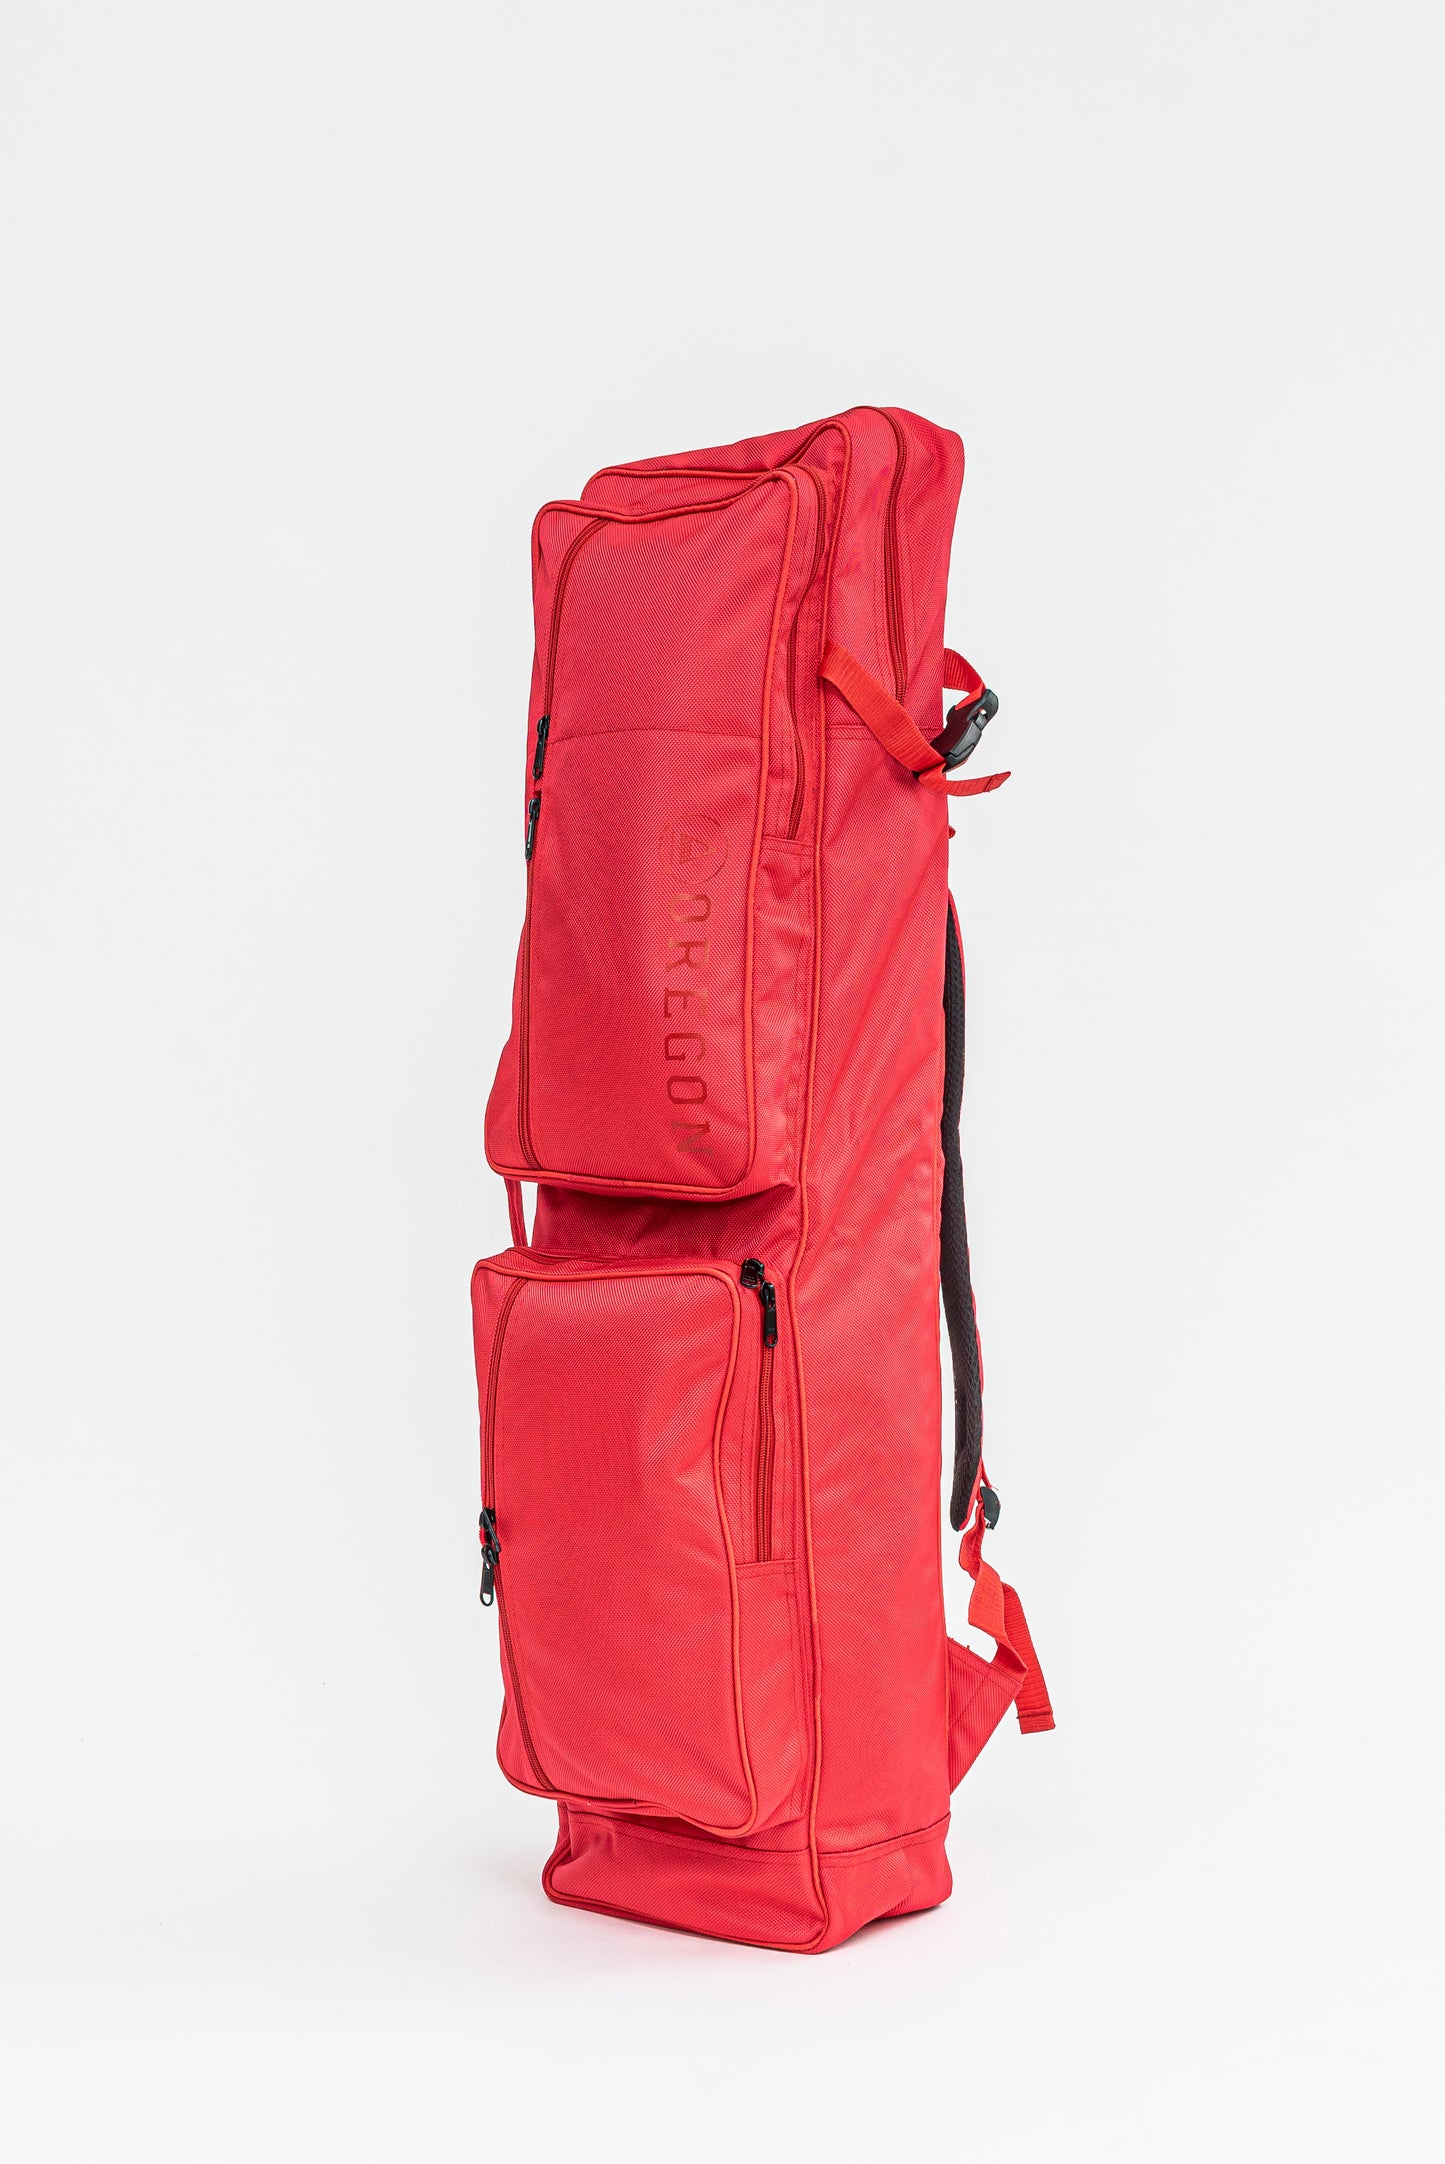 AUTHENTIC PROBAG RED